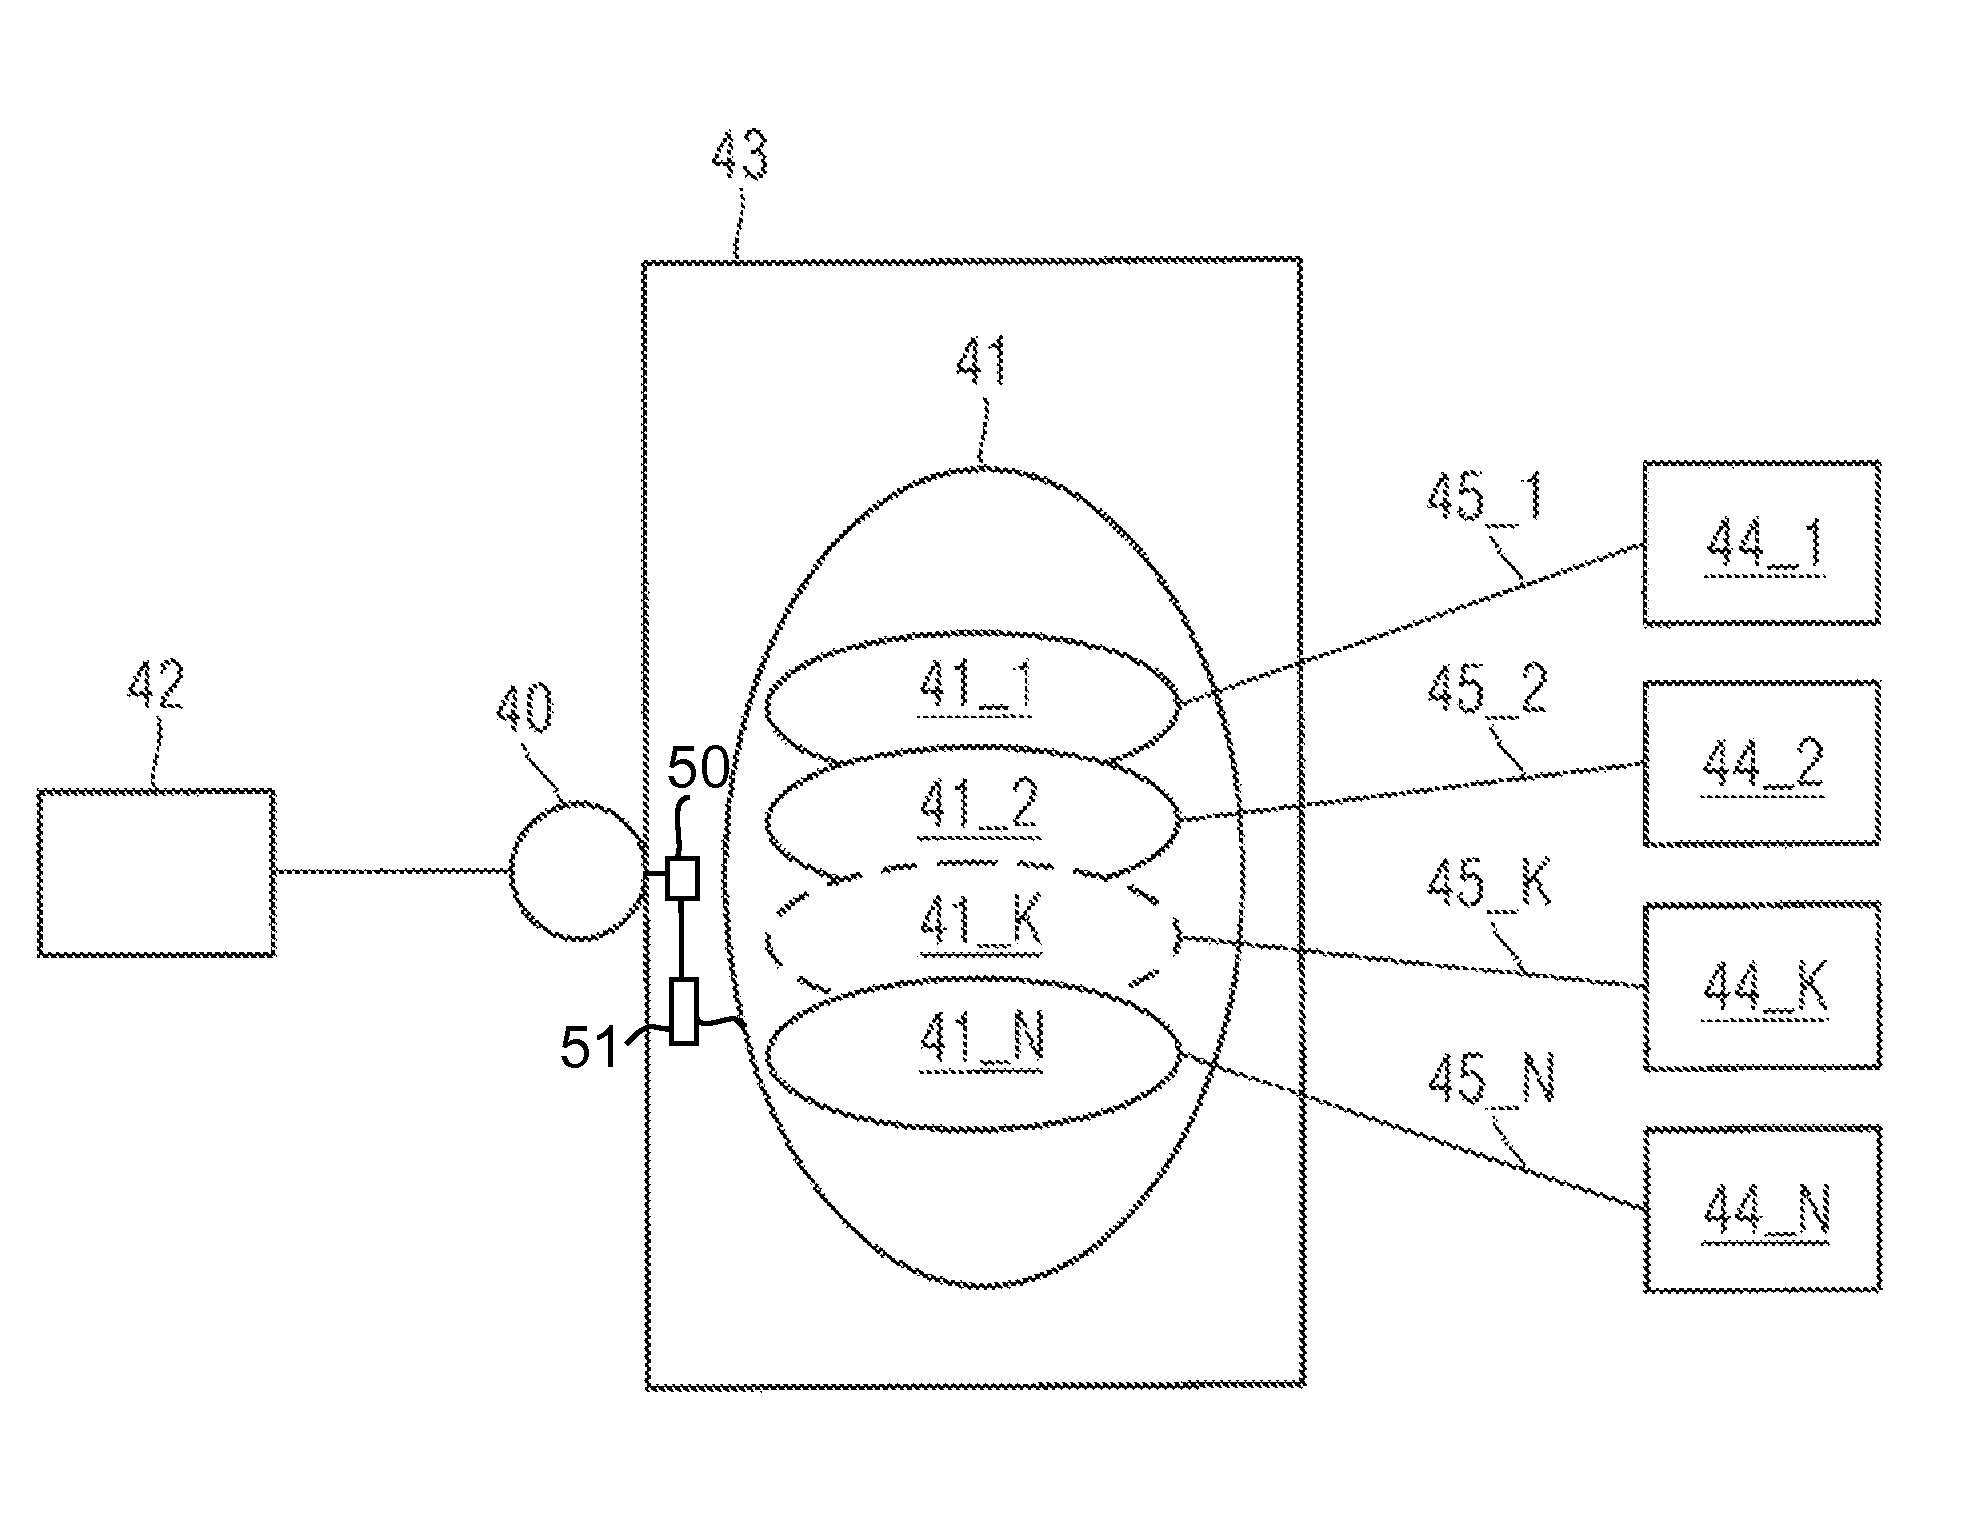 Gateway network element, a method, and a group of load balanced access points configured for load balancing in a communications network